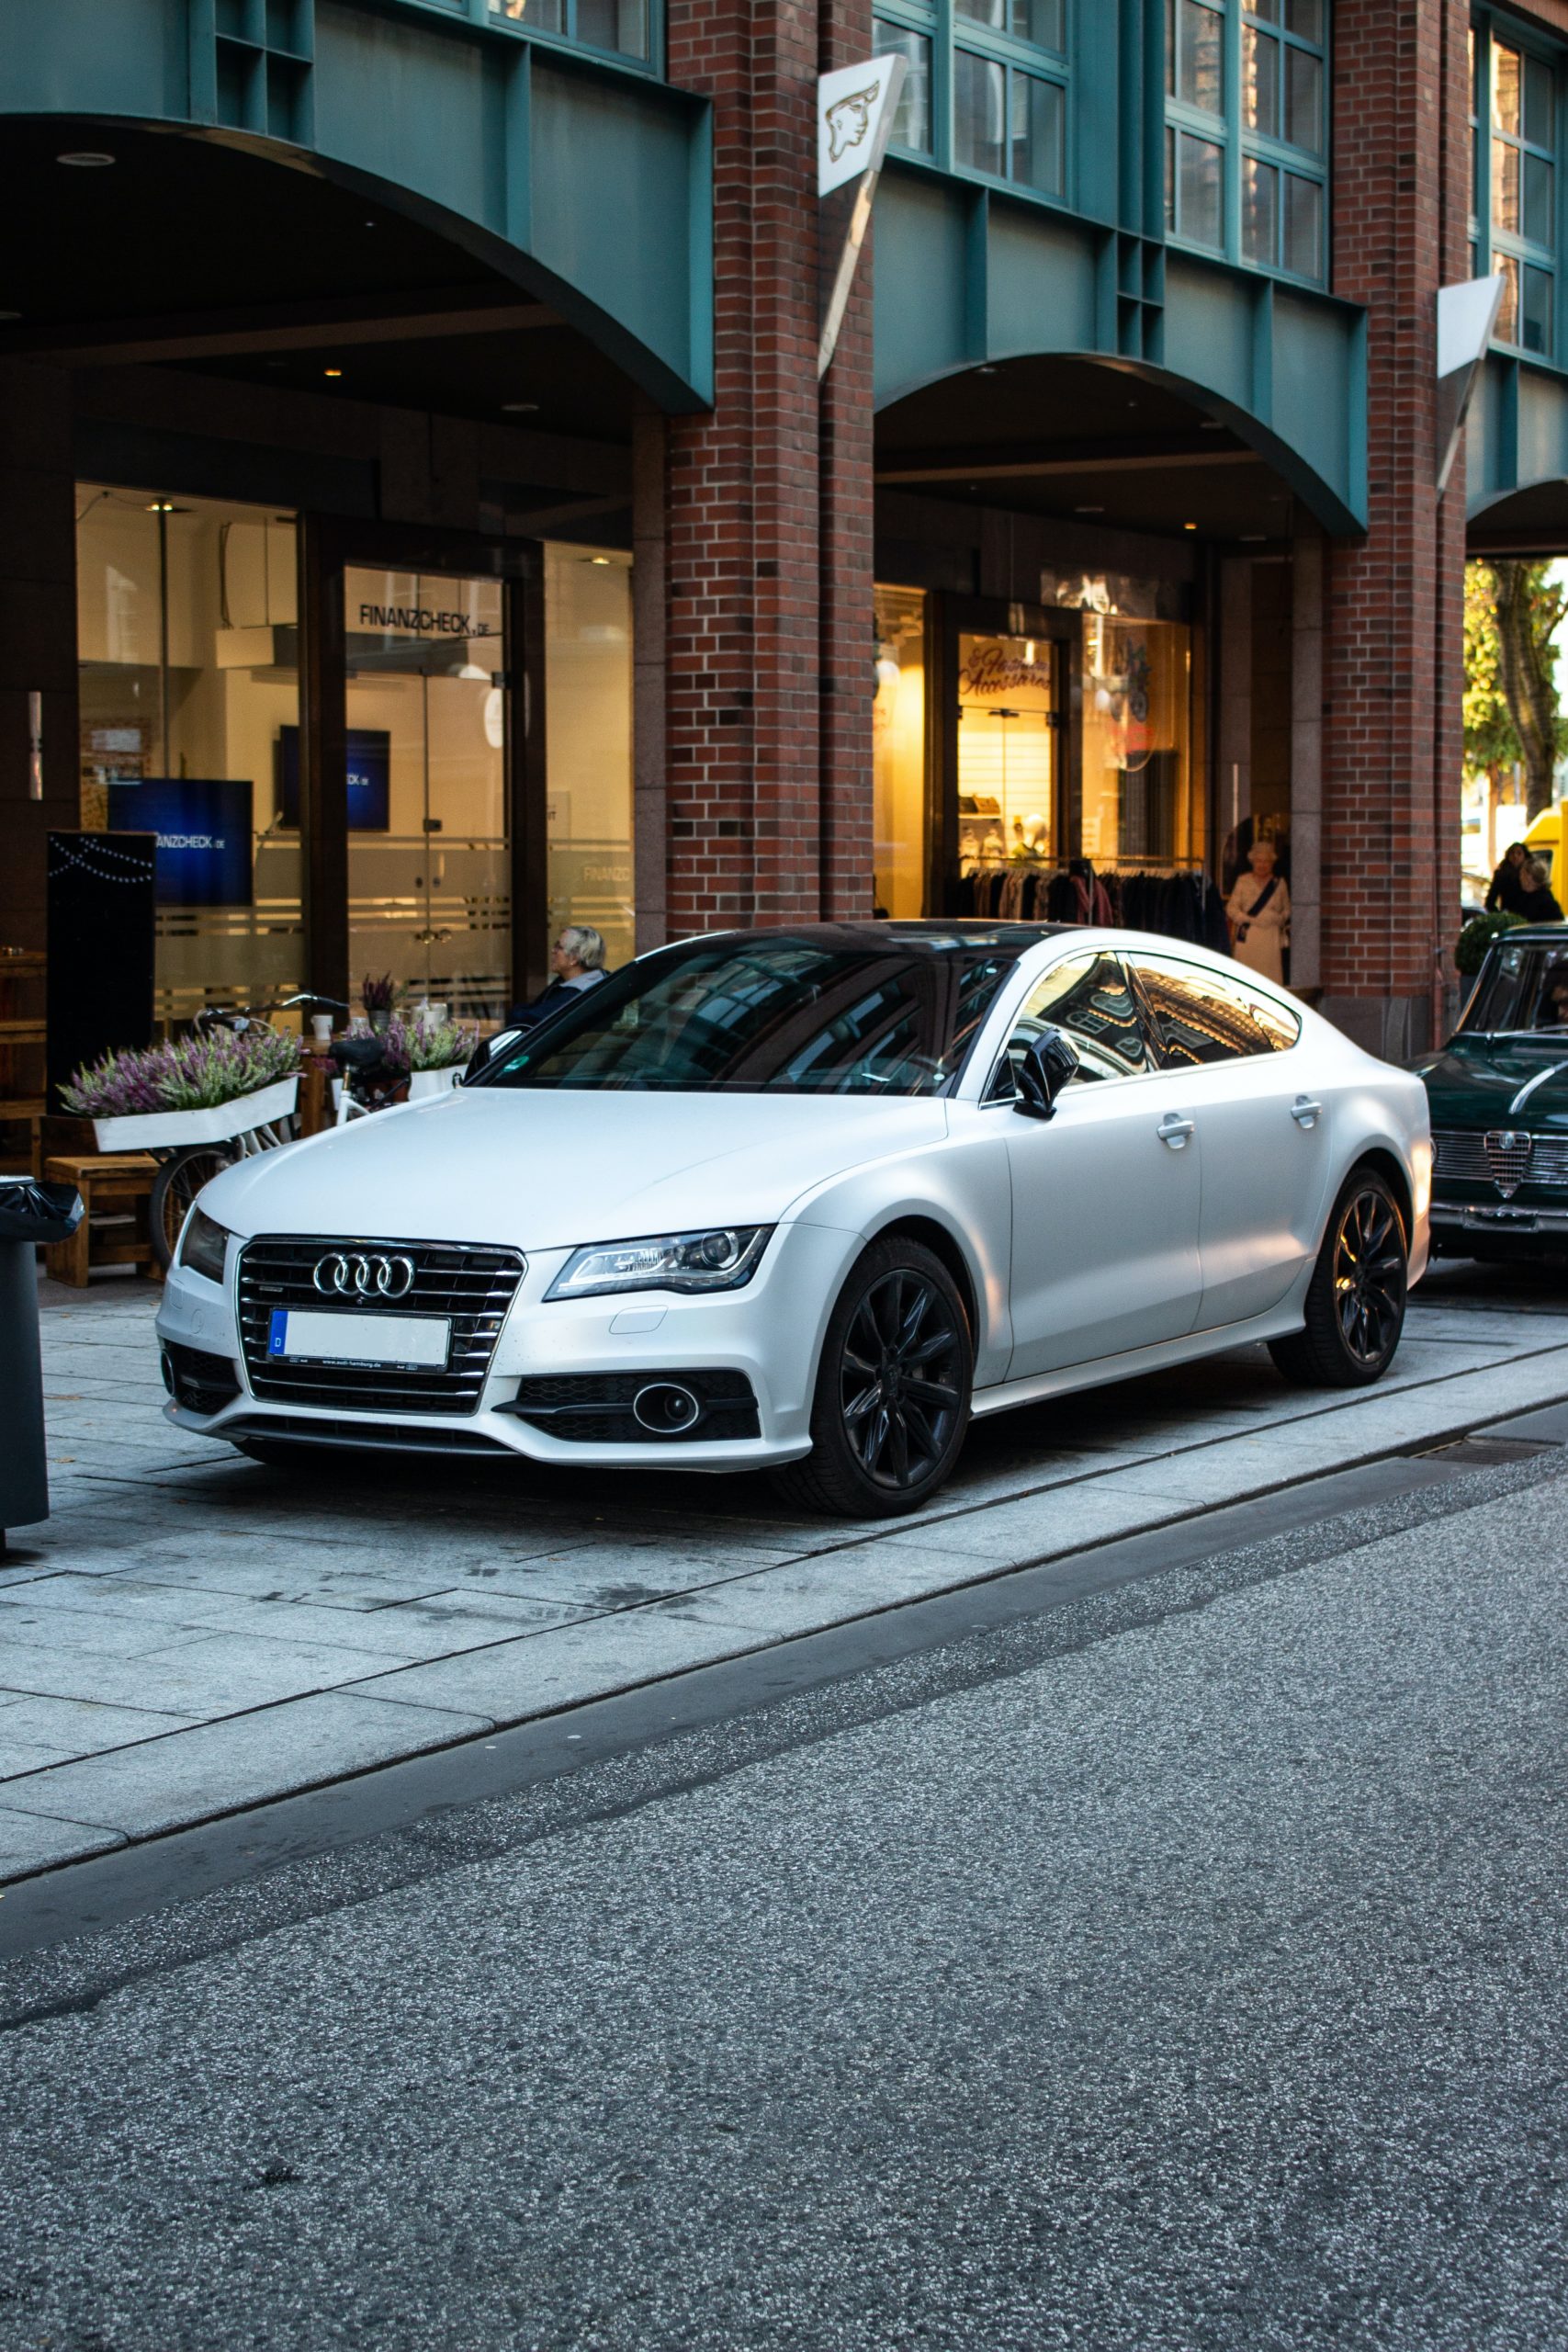 Audi Maintenance Cost: What You Might Pay | Tichi Auto Repair